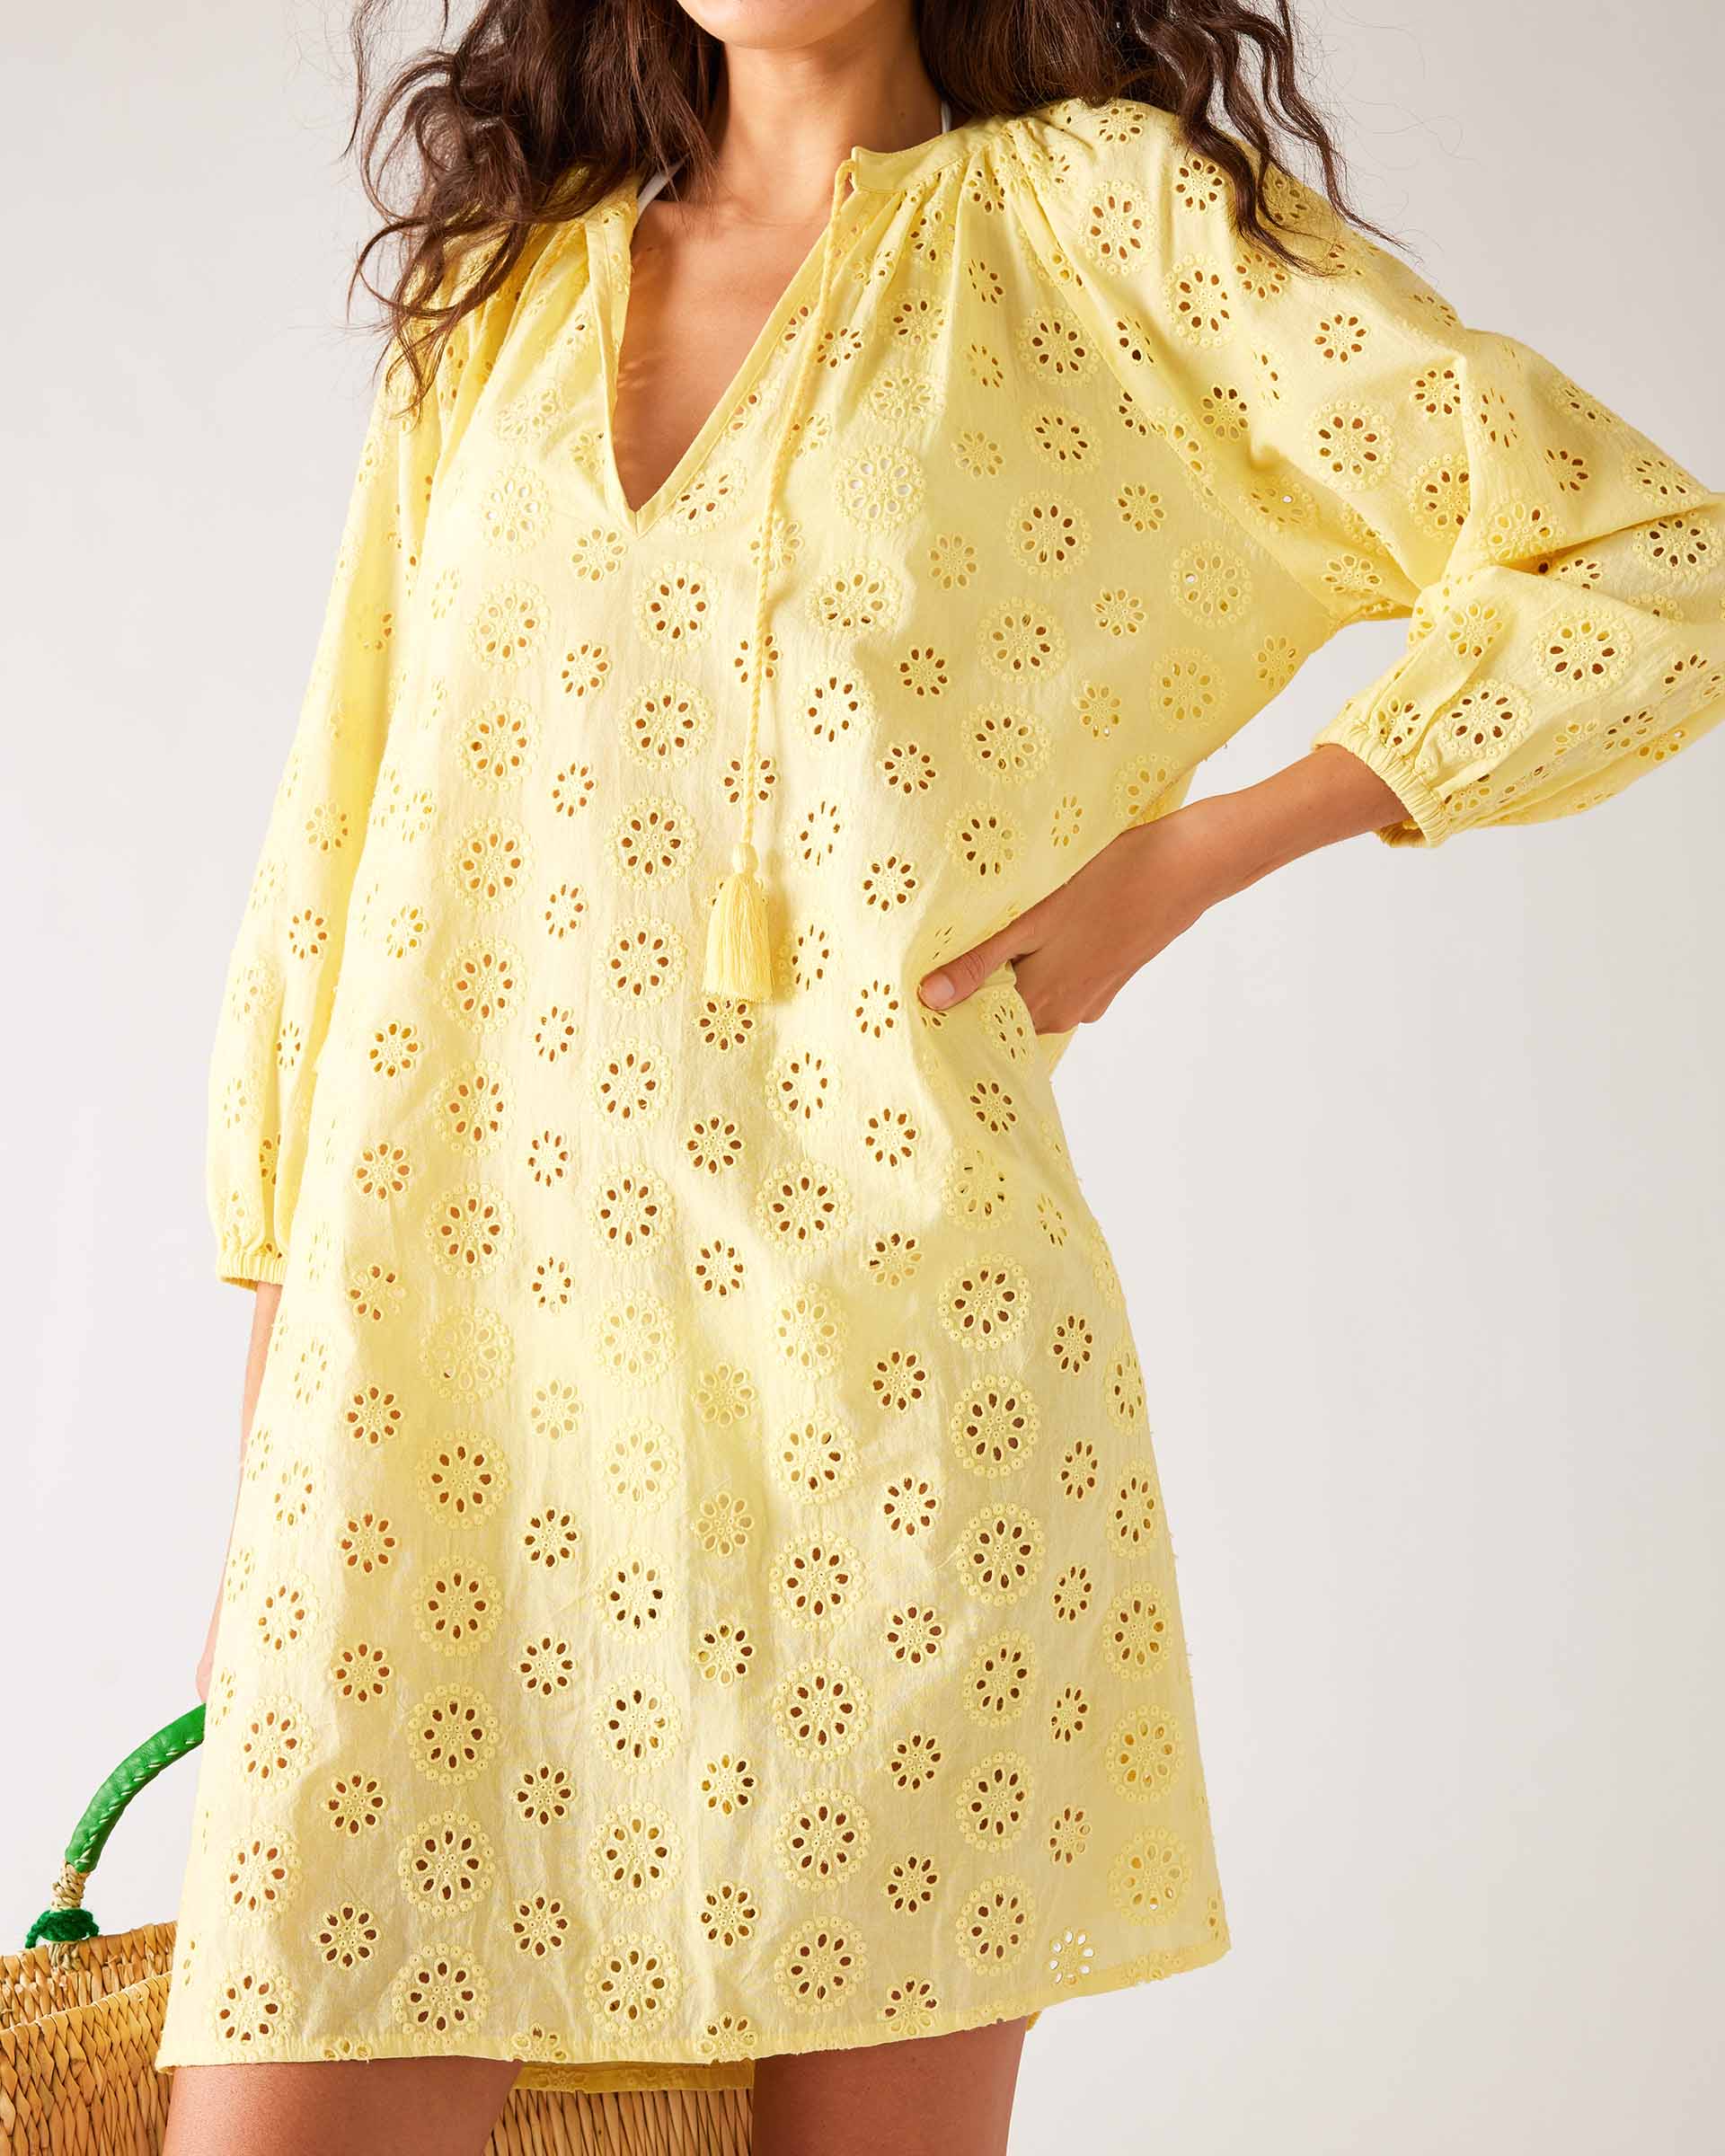 Women's Lightweight Yellow Eyelet Coverup Dress Full Body Front View Holding Bag